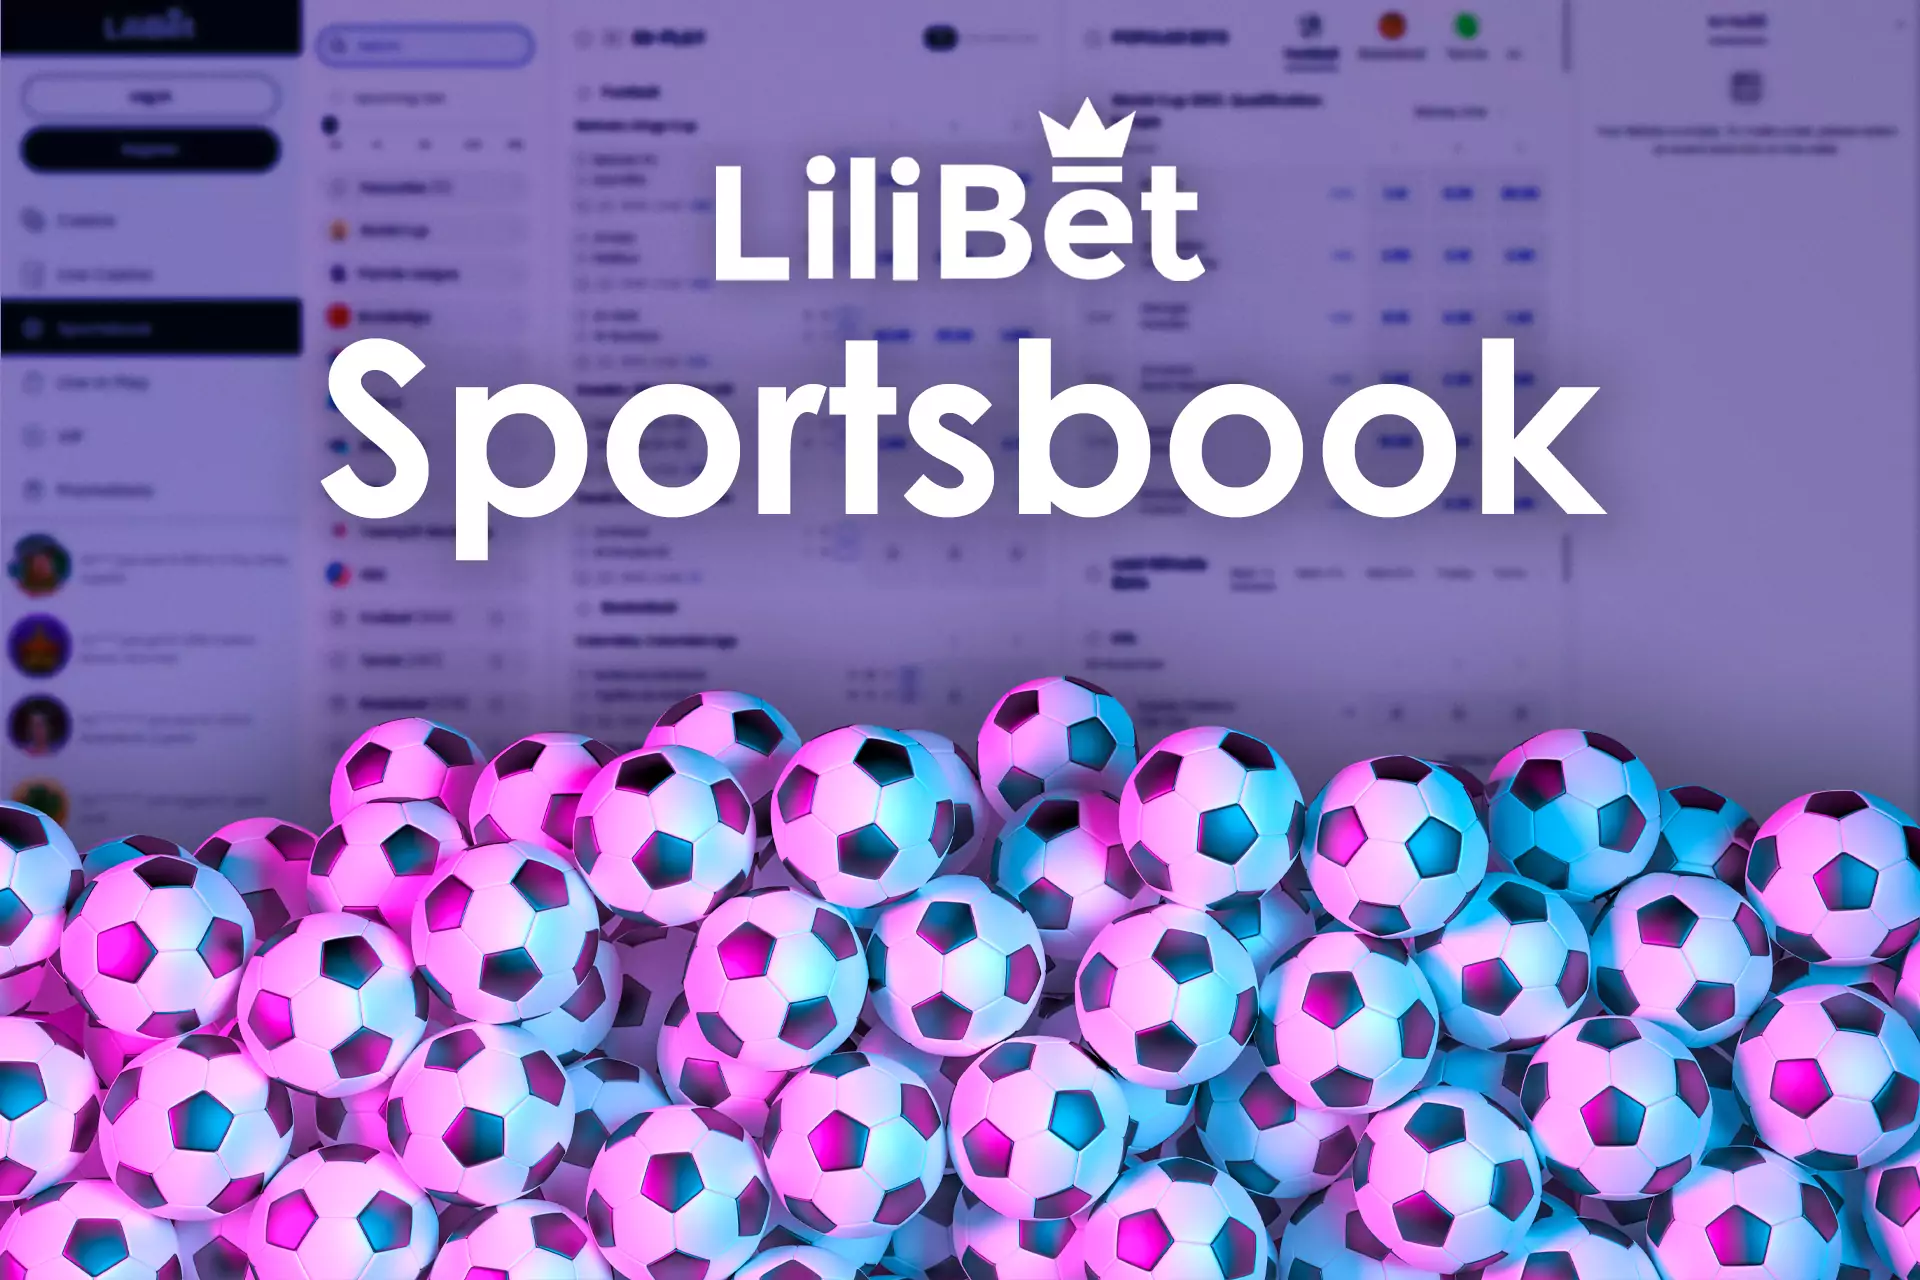 In the Sportsbook of Lilibet you find all the popular sports events.